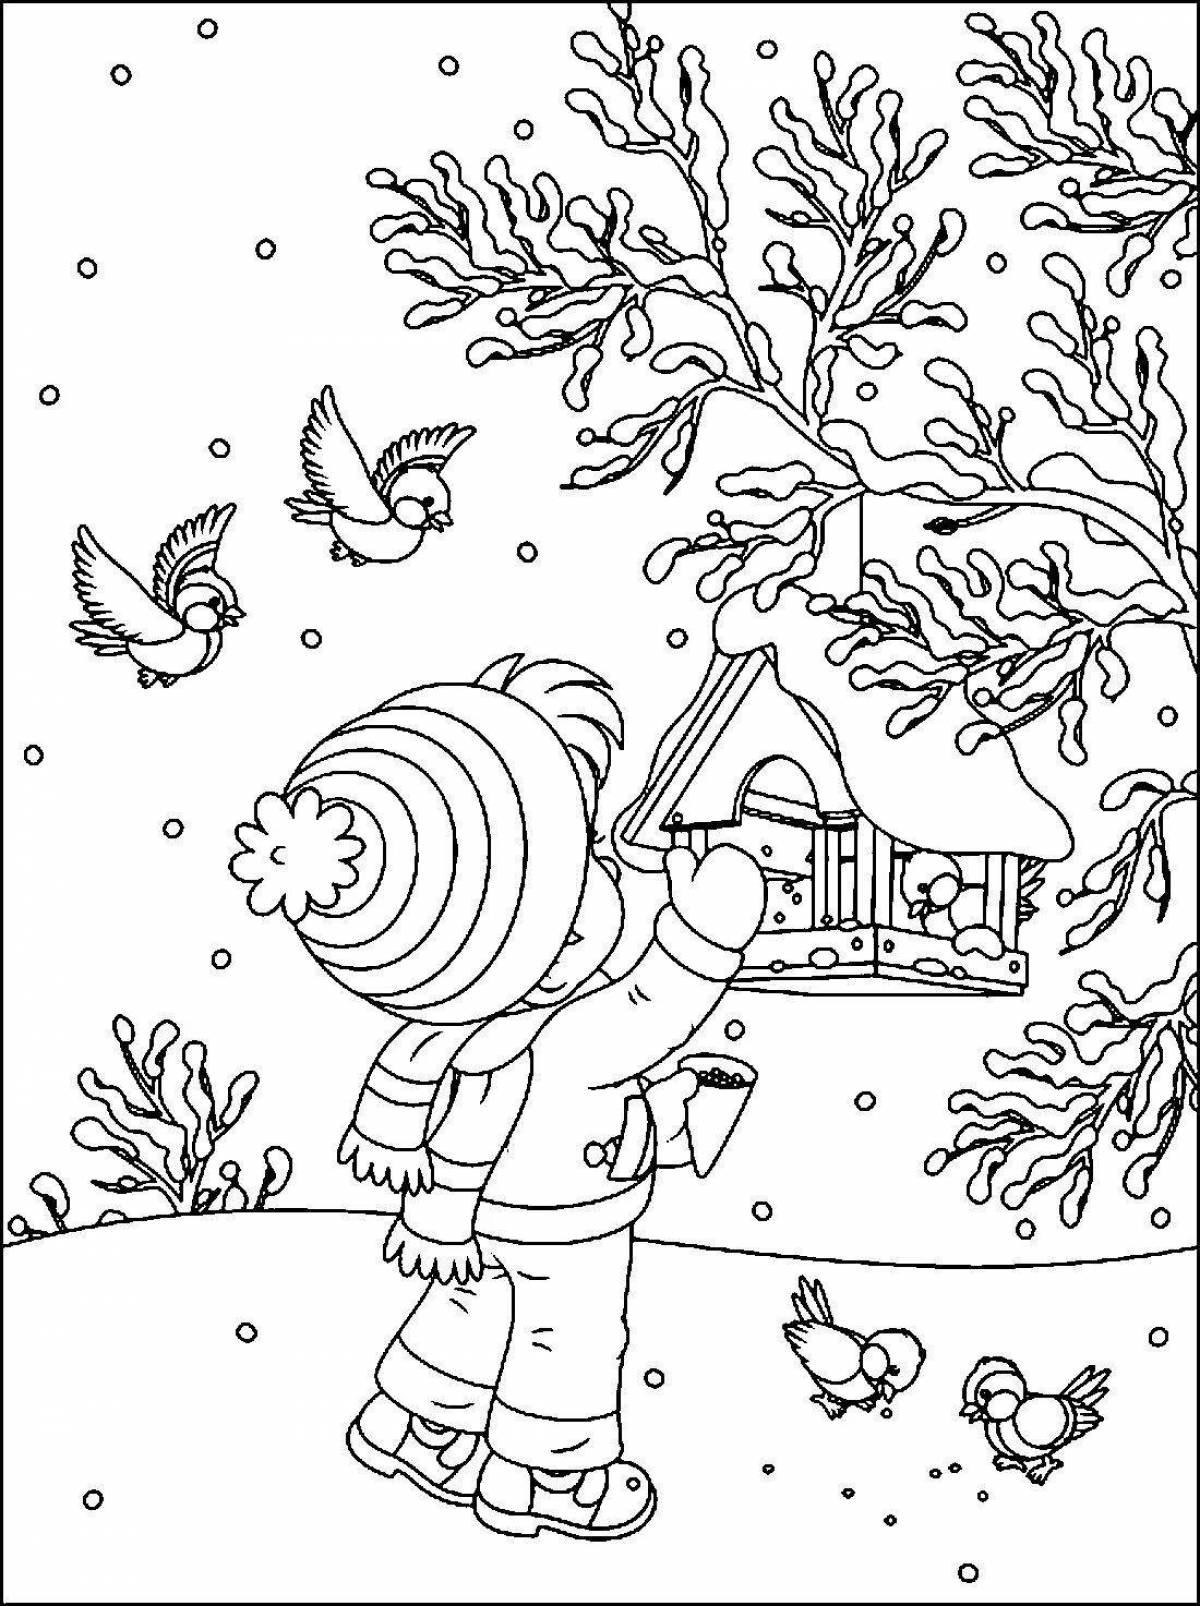 Adorable bird feeder coloring pages for kids in winter